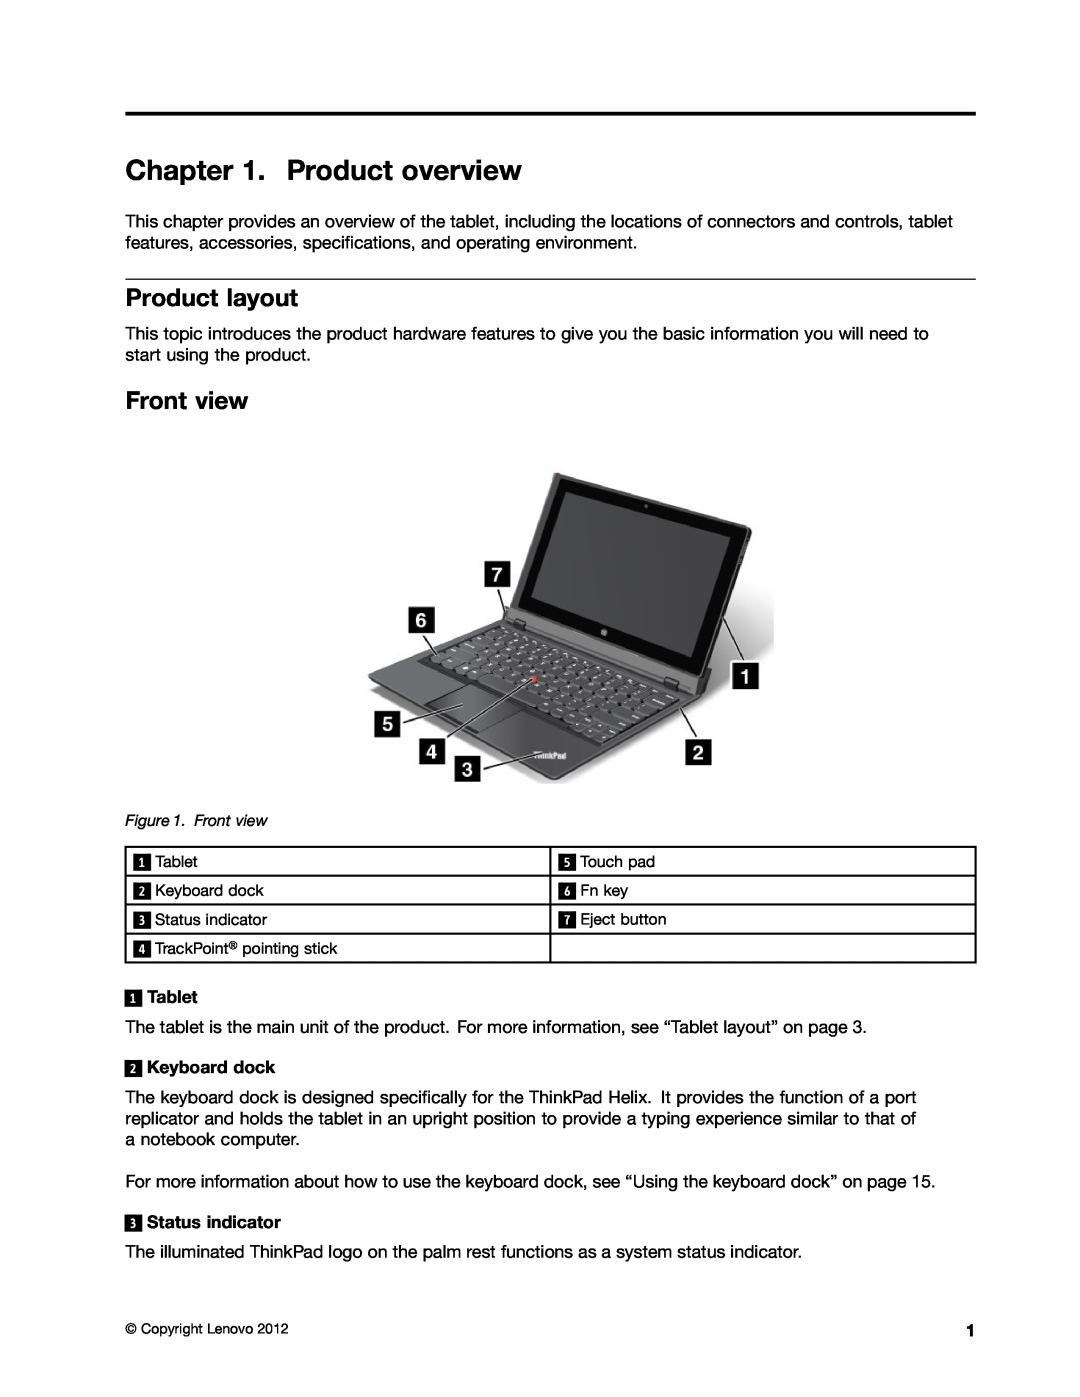 Lenovo 370245U, 36984UU, 36984RU manual Product overview, Product layout, Front view, Tablet, Keyboard dock, Status indicator 